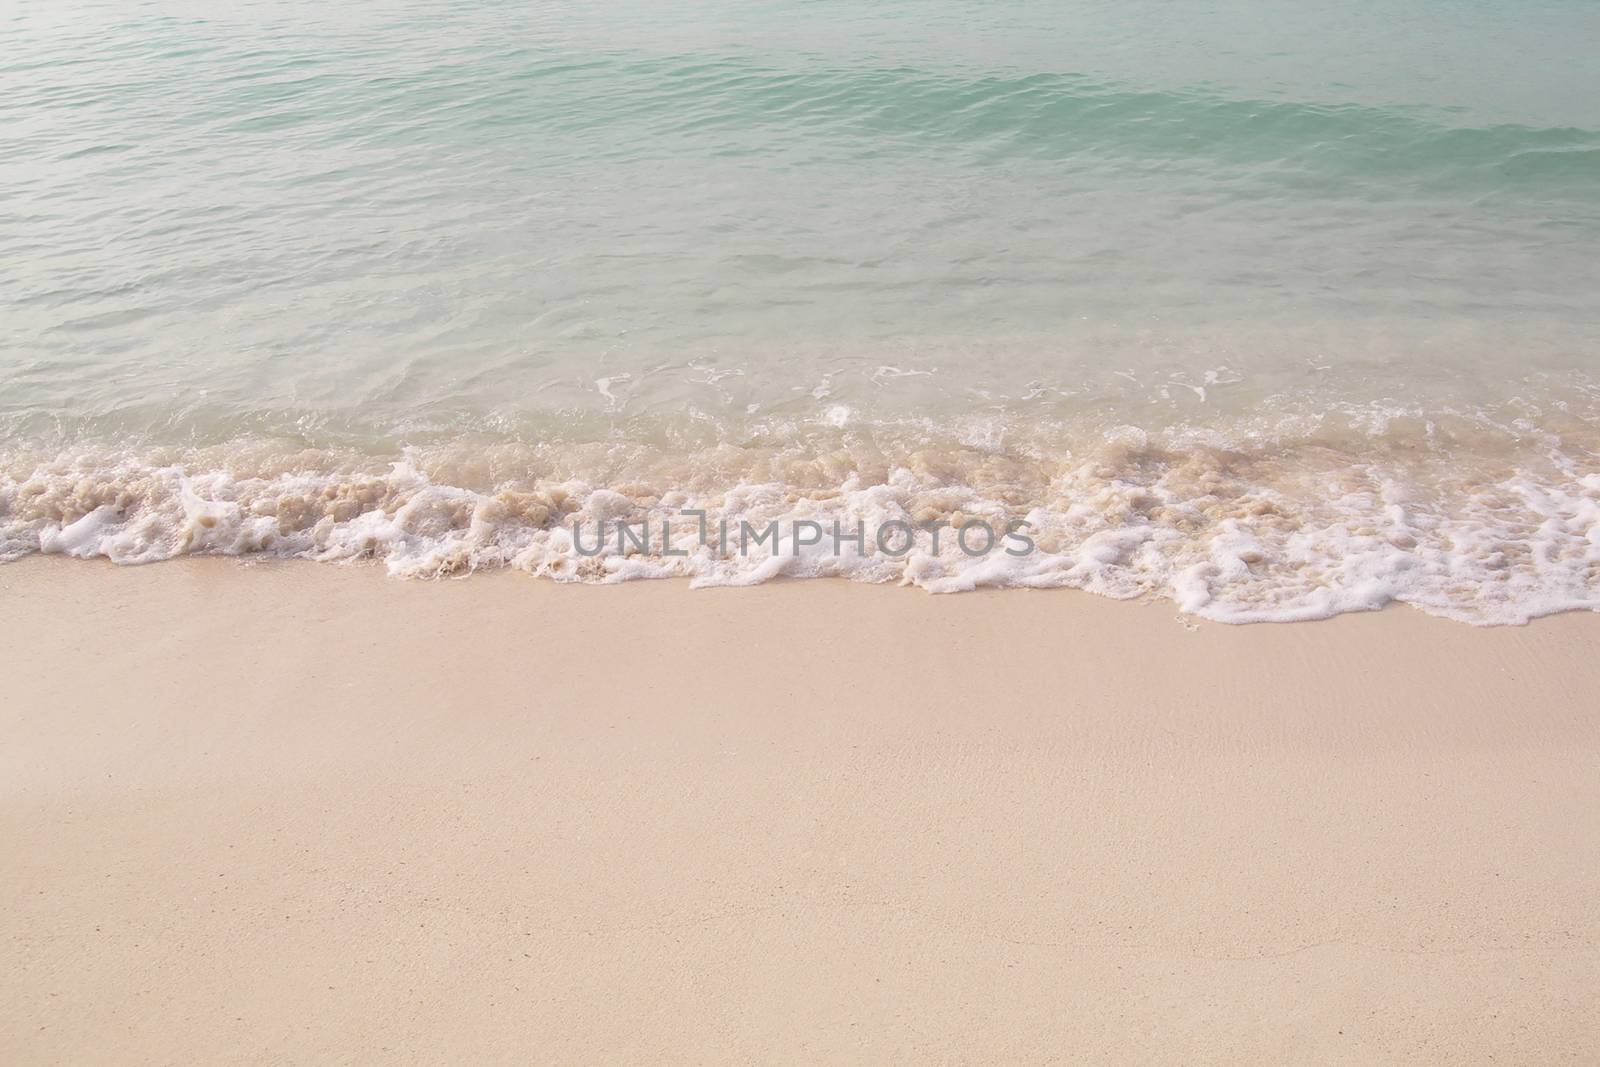 Small waves reaching the shore of the beach by raul_ruiz